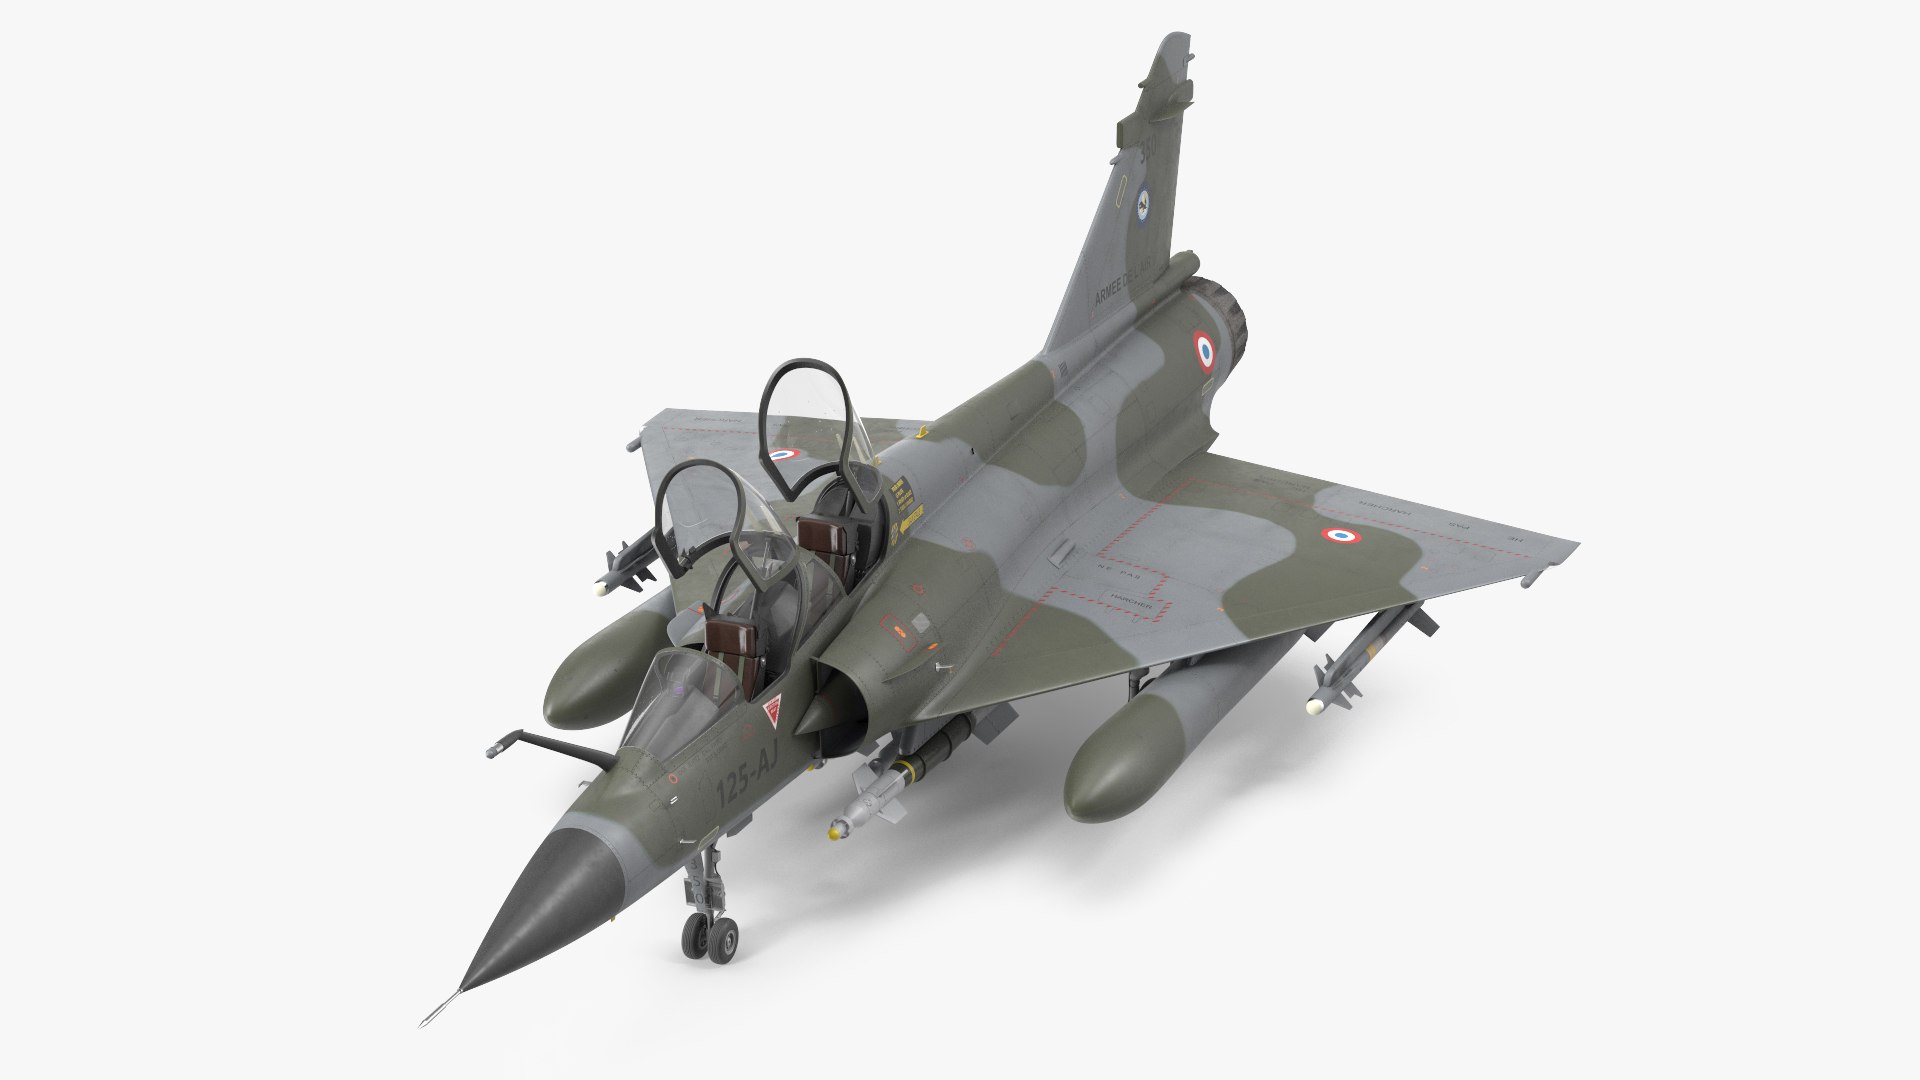 Dassault Mirage 2000N Tactical Bomber Camouflage with Armament Rigged model https://p.turbosquid.com/ts-thumb/np/jUCvfy/RX/dassaultmirage2000ntacticalbombercamouflagewitharmamentrigged3dsmodel001/jpg/1638174734/1920x1080/fit_q87/3a5117052fa0b285dc031920ba2fa3bf3758b17b/dassaultmirage2000ntacticalbombercamouflagewitharmamentrigged3dsmodel001.jpg